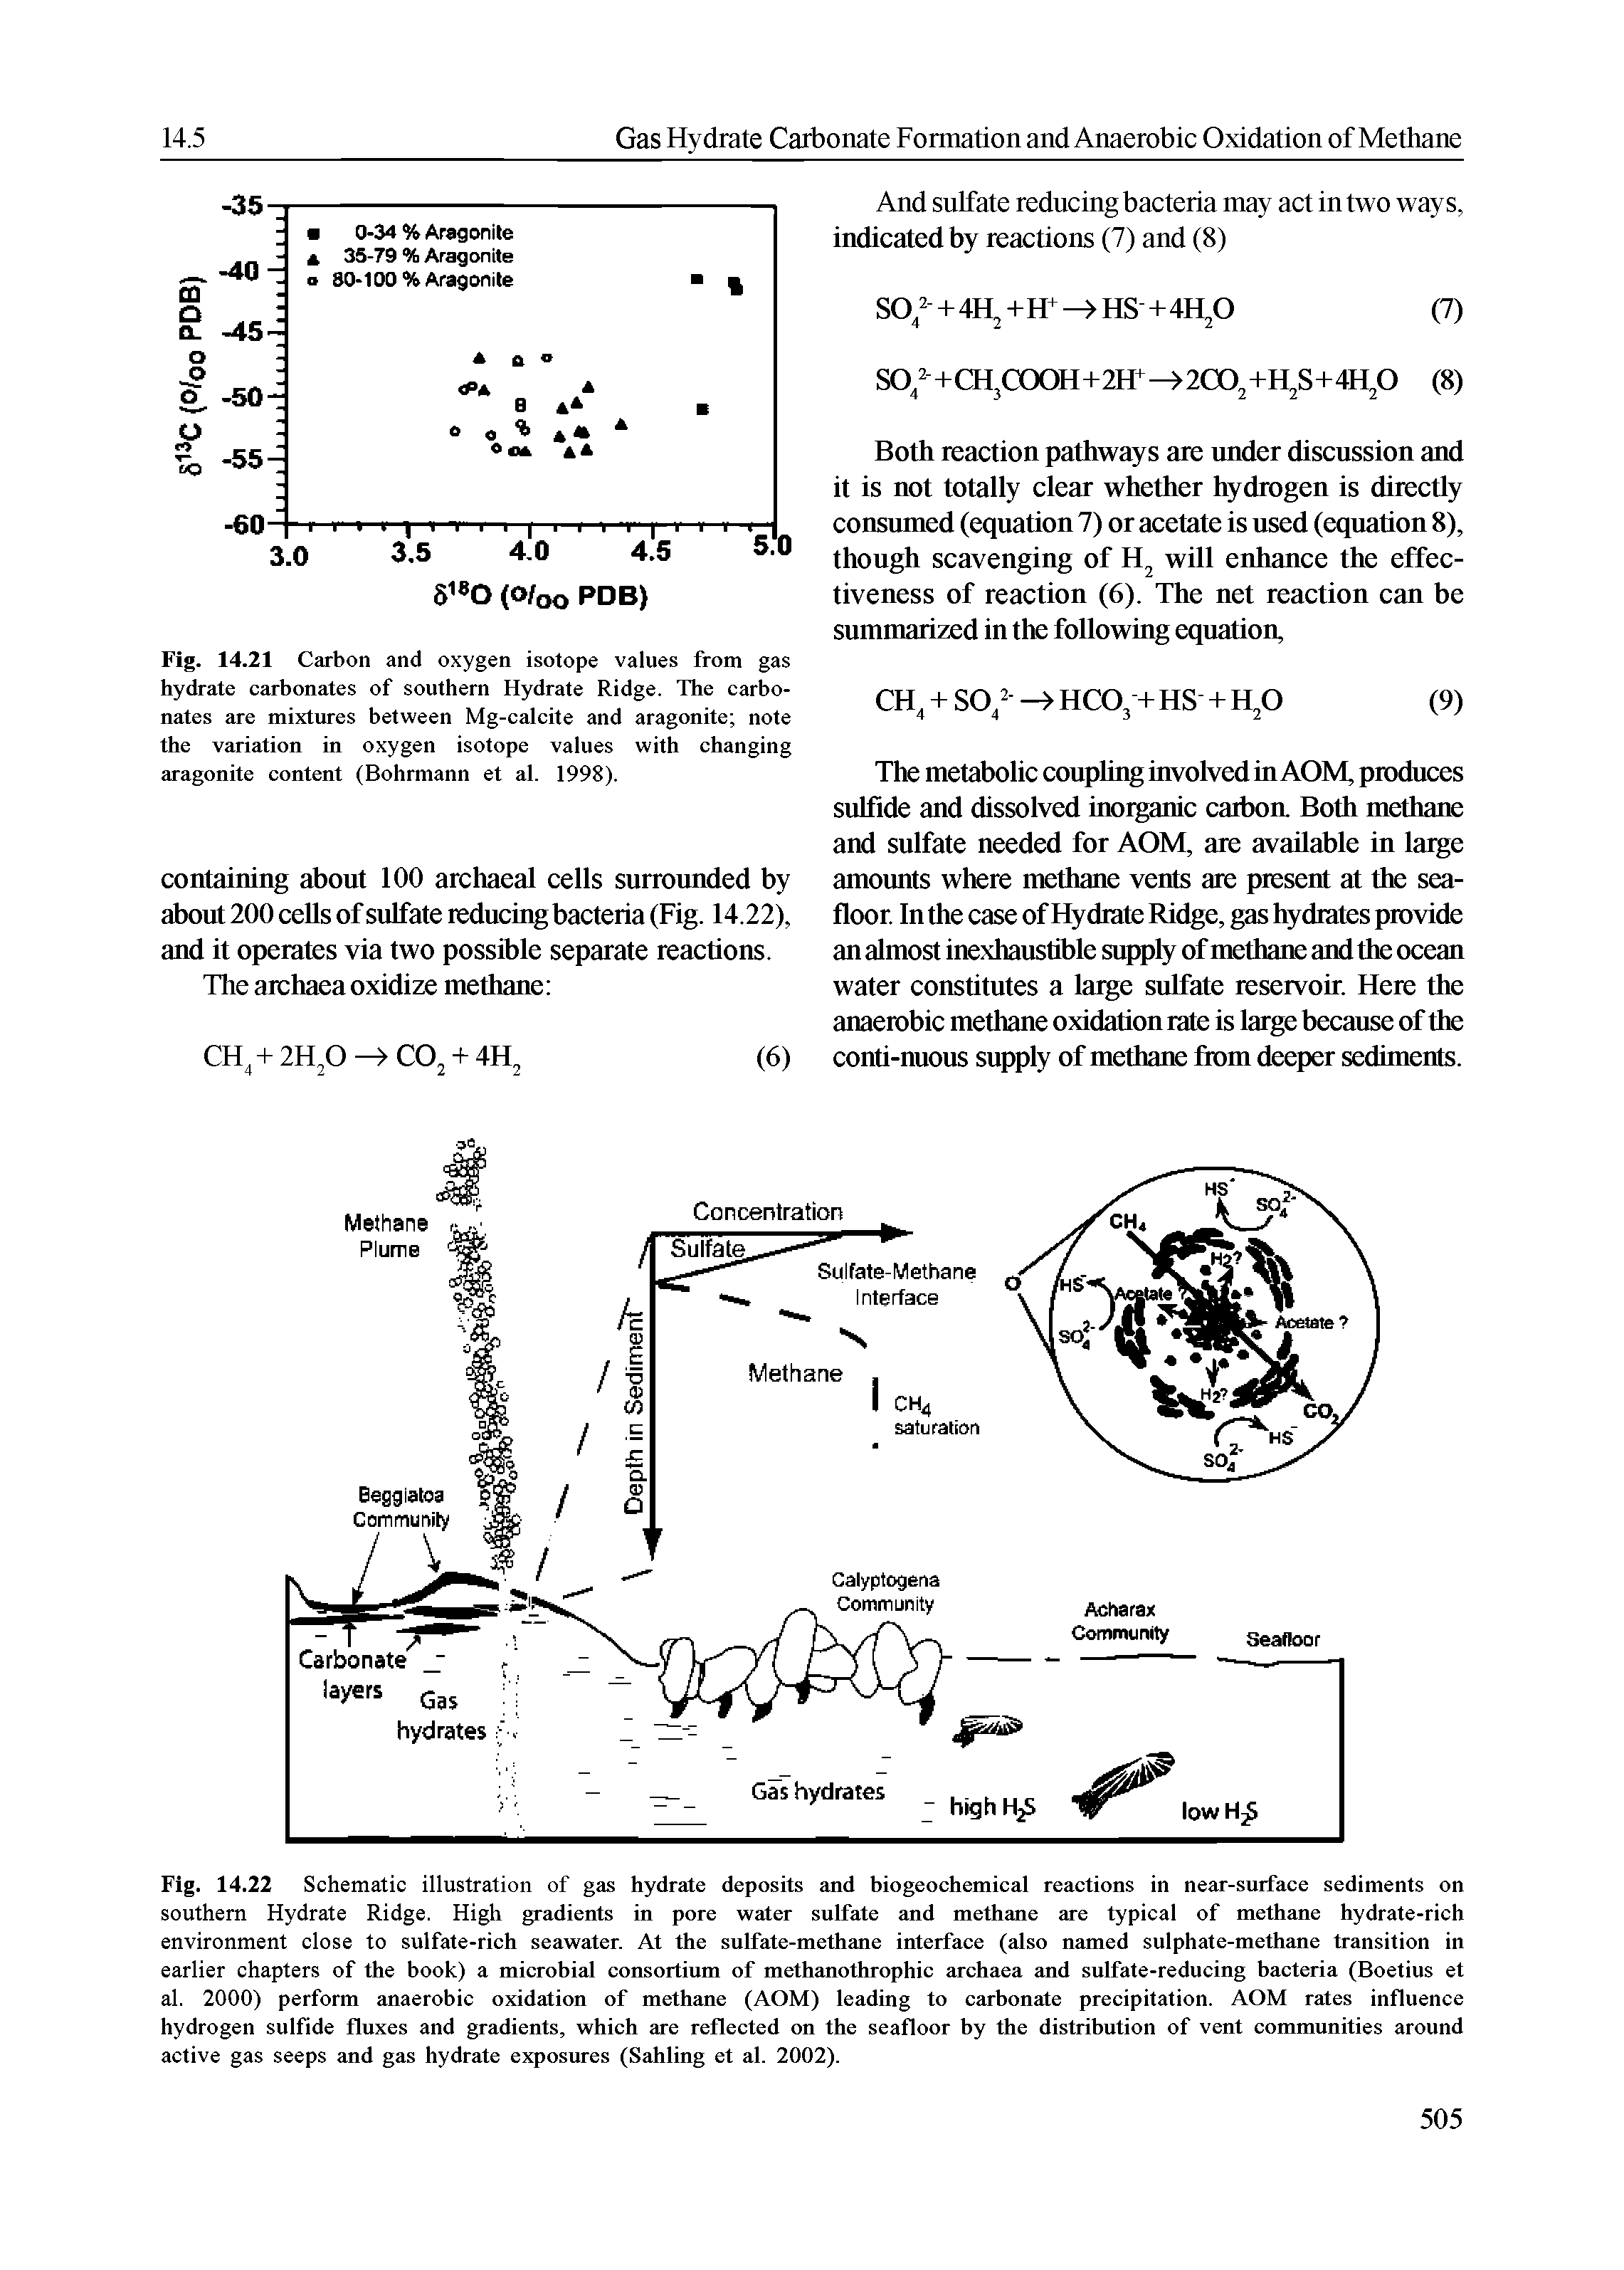 Fig. 14.22 Schematic illustration of gas hydrate deposits and biogeochemical reactions in near-surface sediments on southern Hydrate Ridge. High gradients in pore water sulfate and methane are typical of methane hydrate-rich environment close to sulfate-rich seawater. At the sulfate-methane interface (also named sulphate-methane transition in earlier chapters of the book) a microbial consortium of methanothrophic archaea and sulfate-reducing bacteria (Boetius et al. 2000) perform anaerobic oxidation of methane (AOM) leading to carbonate precipitation. AOM rates influence hydrogen sulfide fluxes and gradients, which are reflected on the seafloor by the distribution of vent communities around active gas seeps and gas hydrate exposures (Sahling et al. 2002).